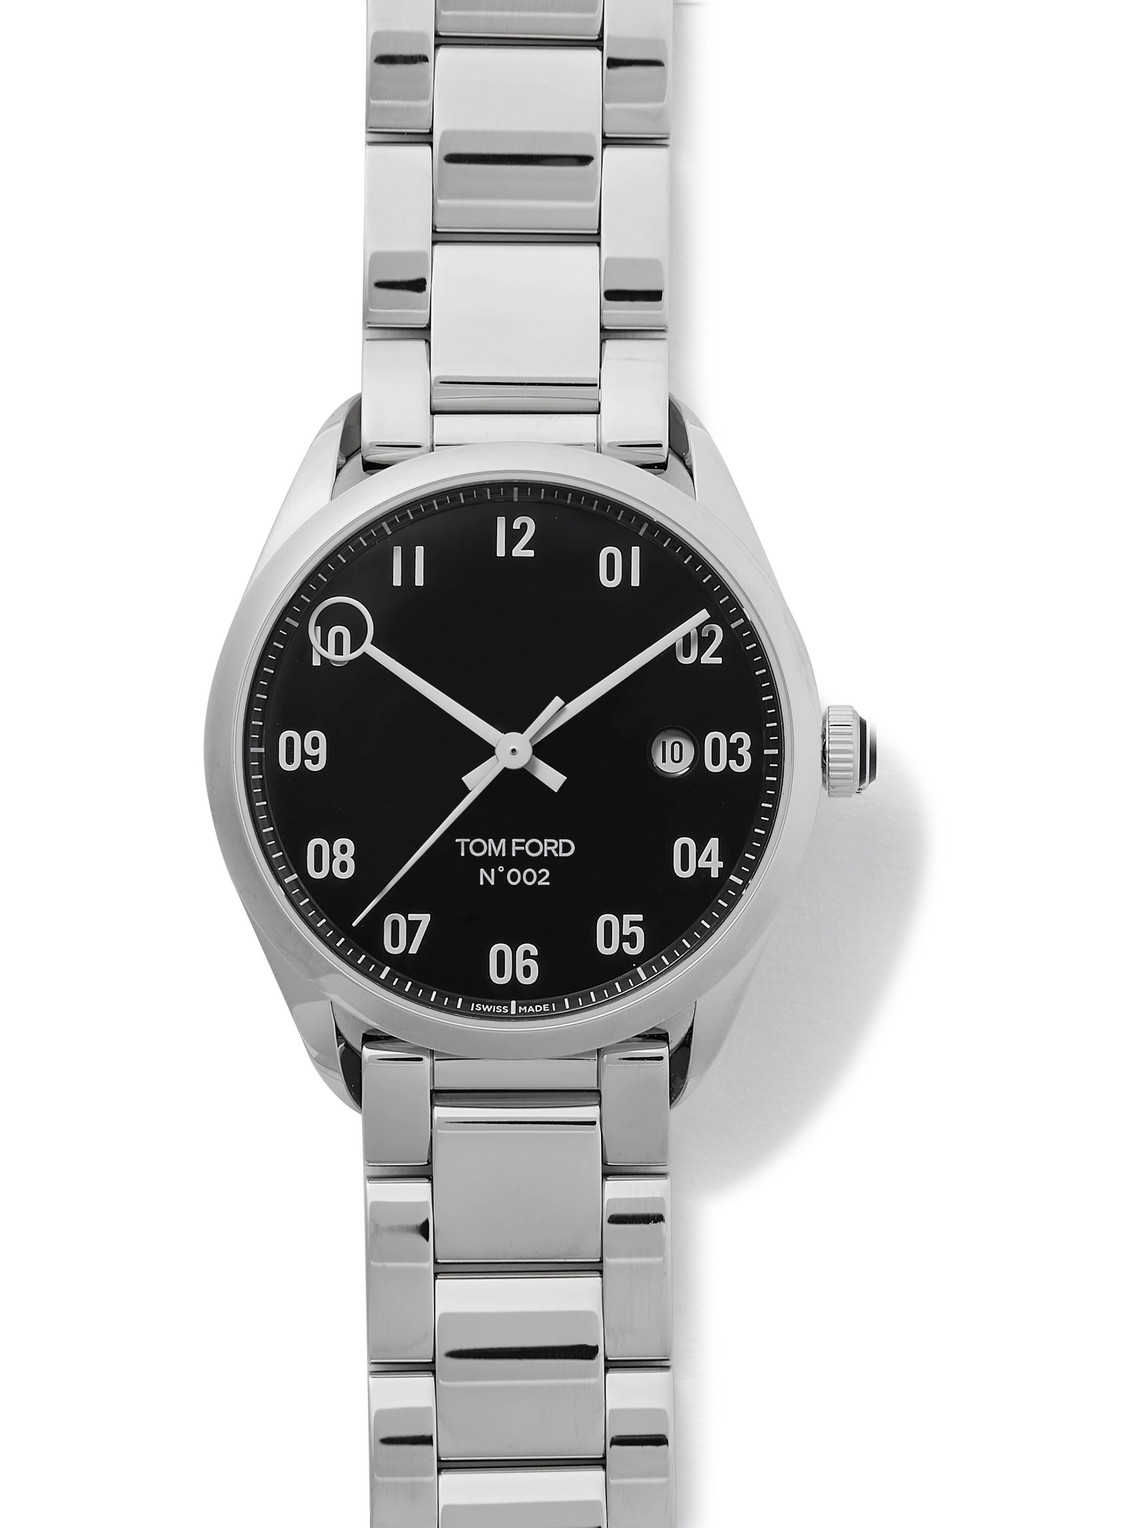 TOM FORD 002 40MM AUTOMATIC STAINLESS STEEL WATCH